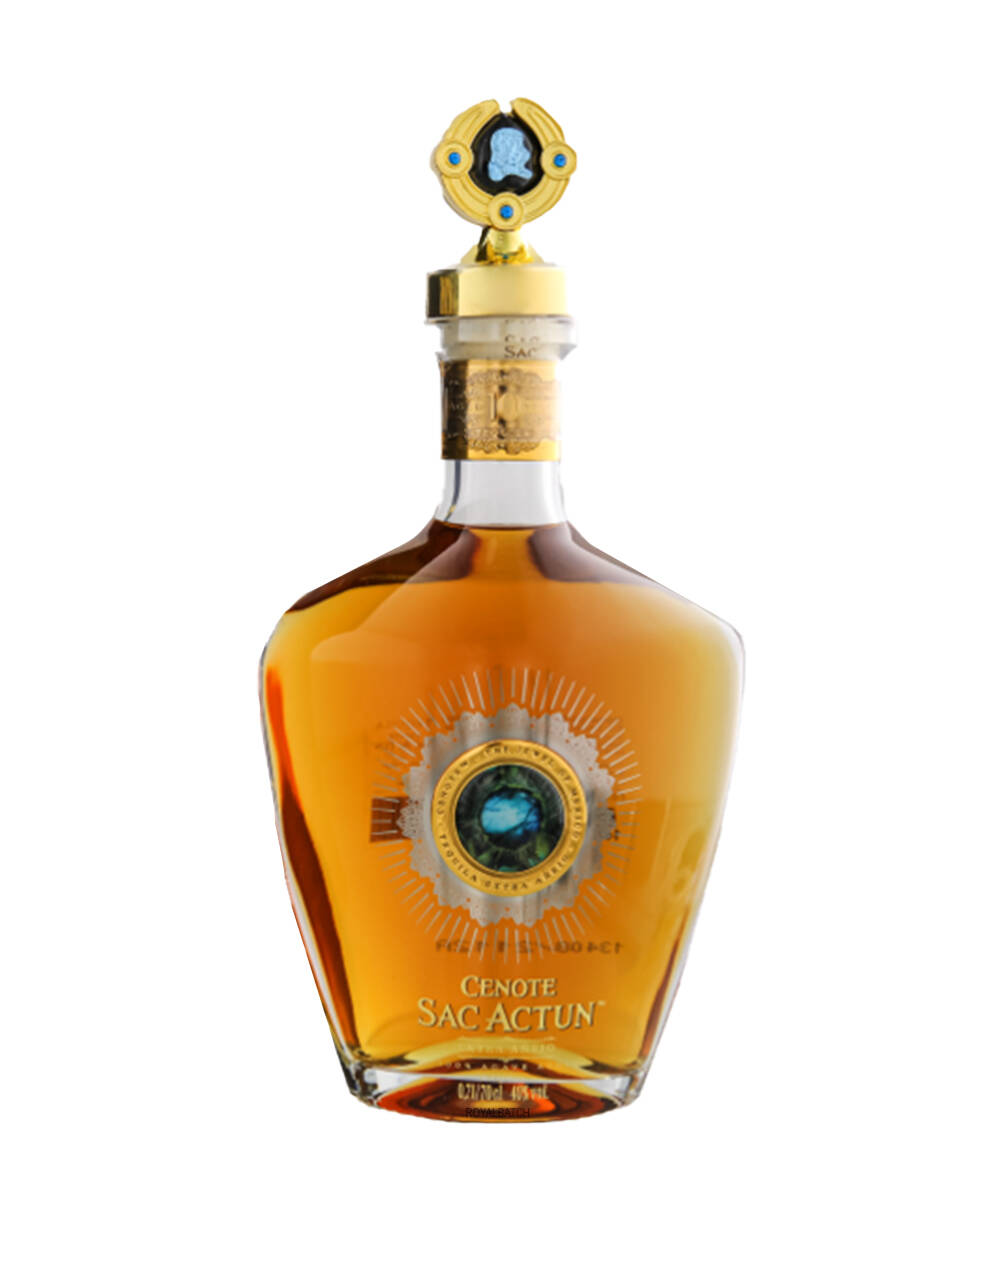 Cenote Sac Actun 10 Year Old Extra Anejo Tequila